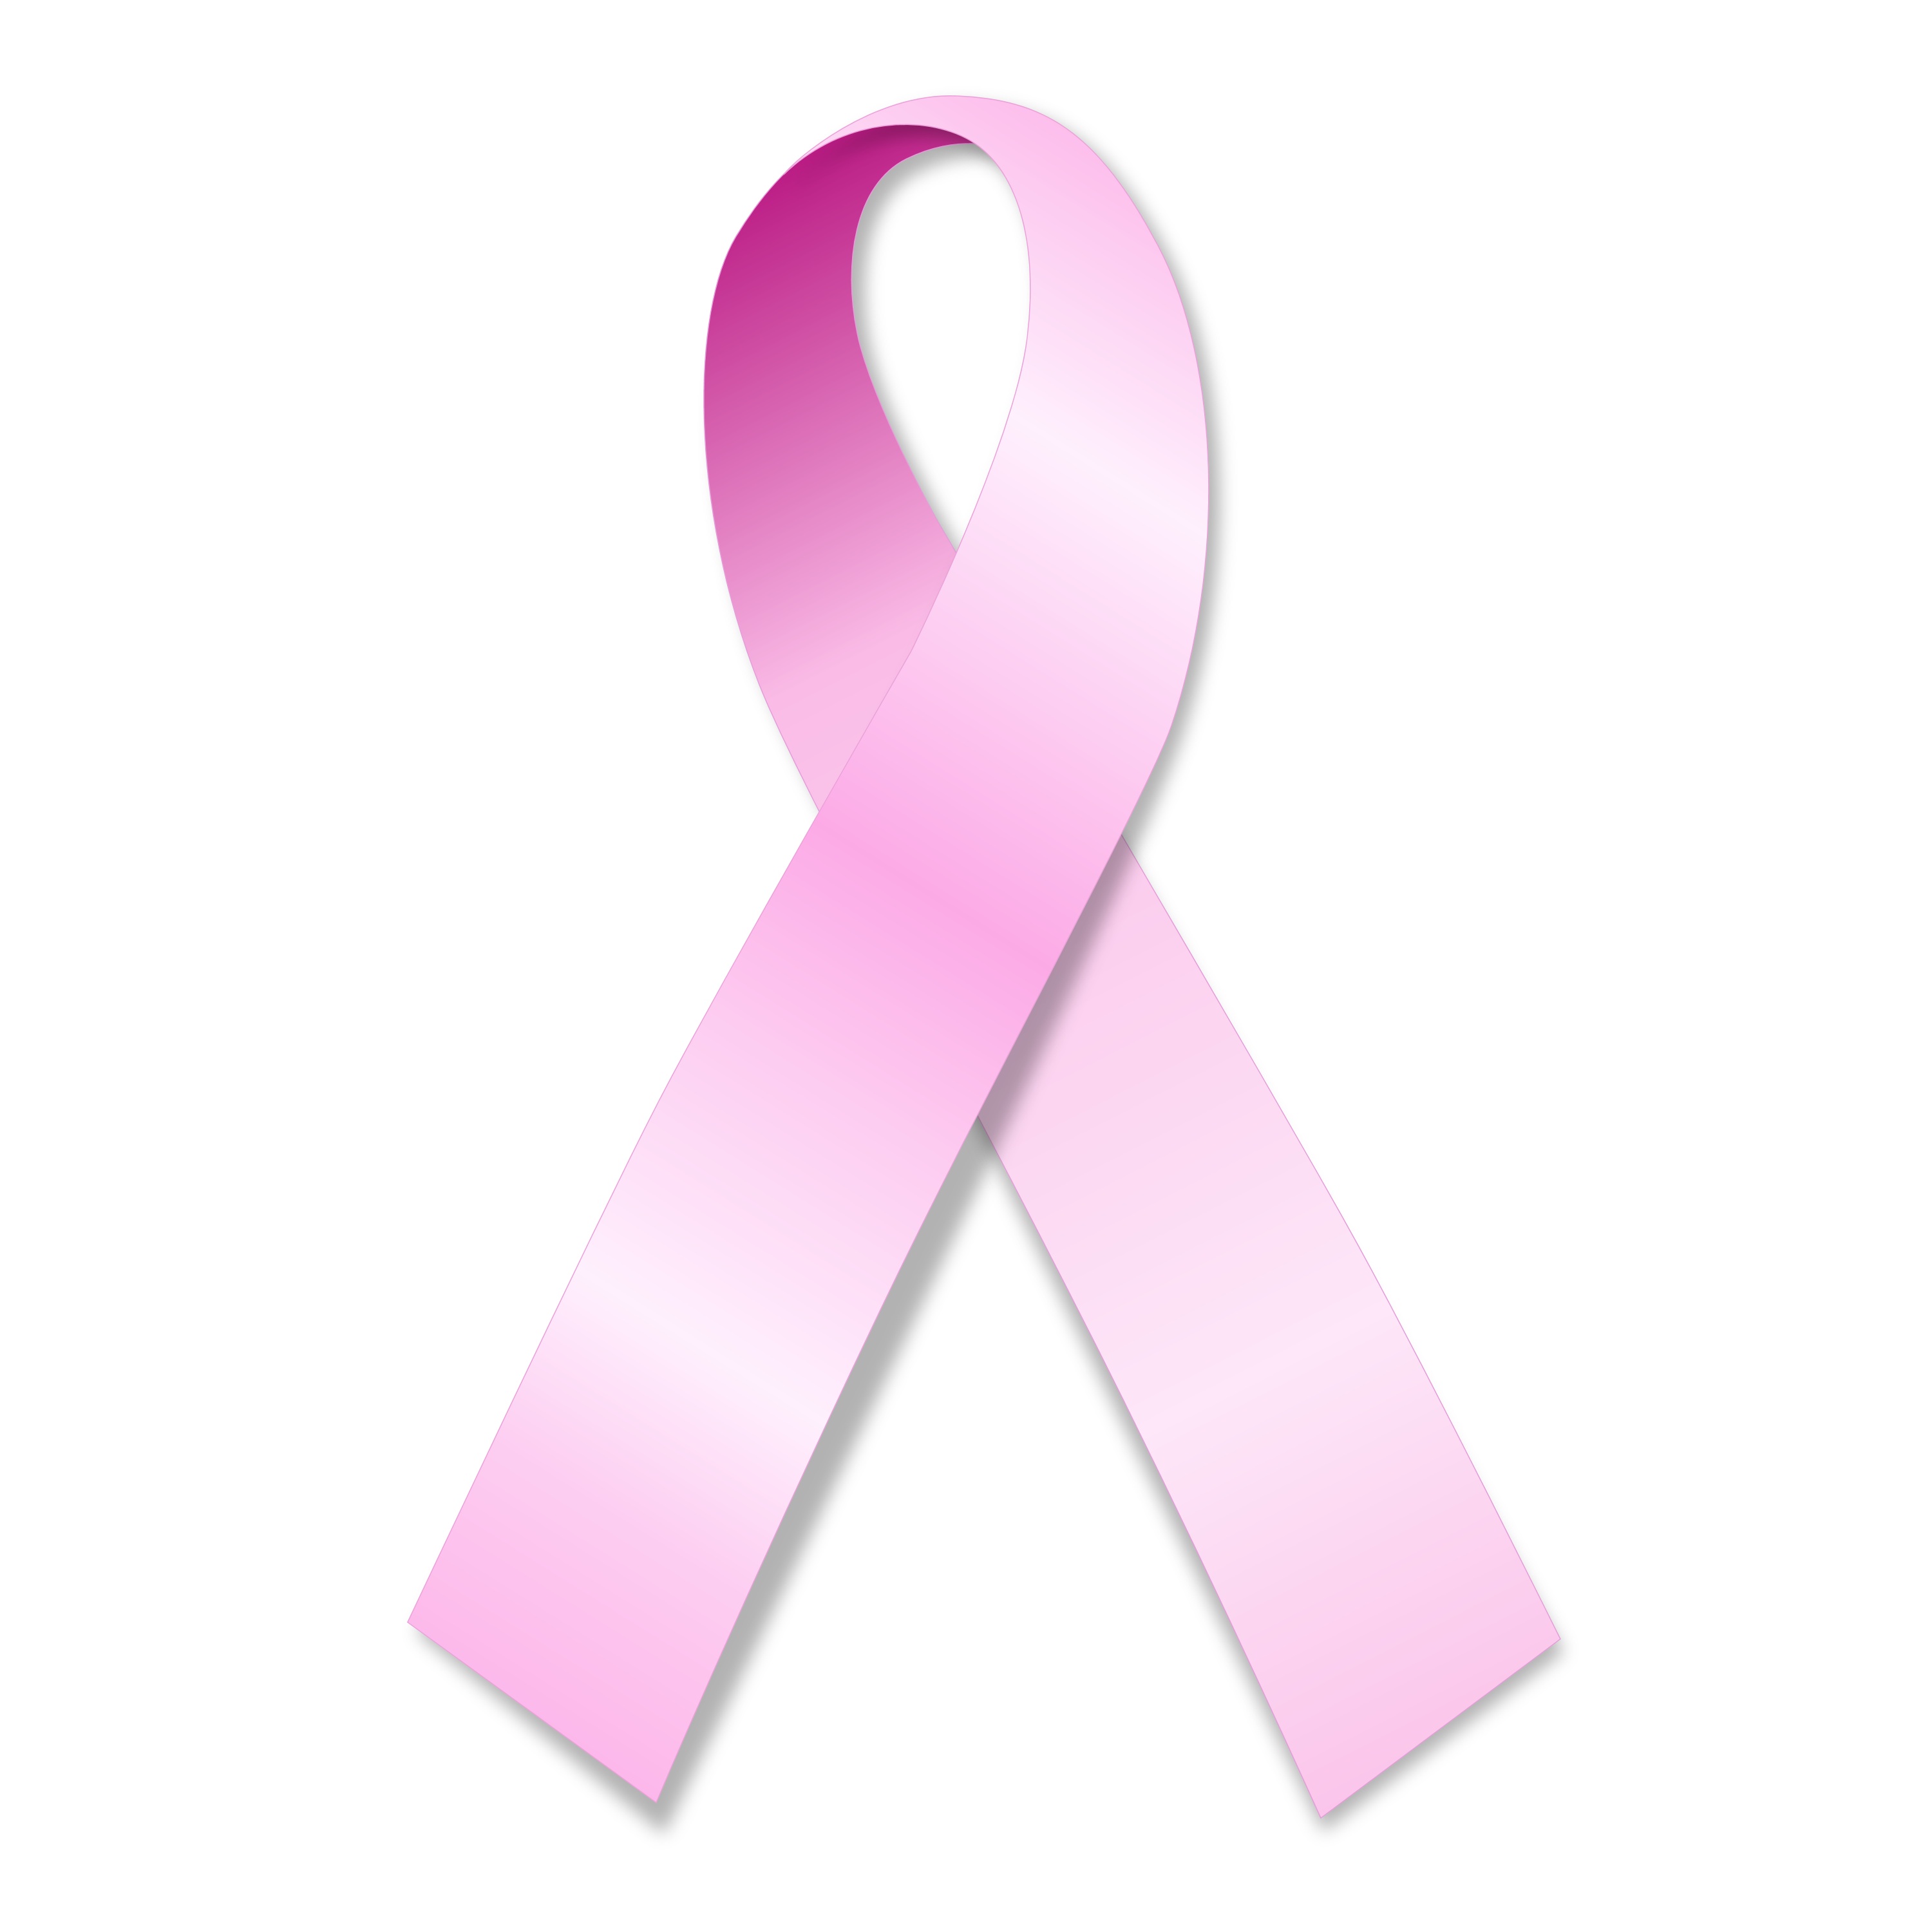 Pix For Vector Cancer Ribbon Free Download.